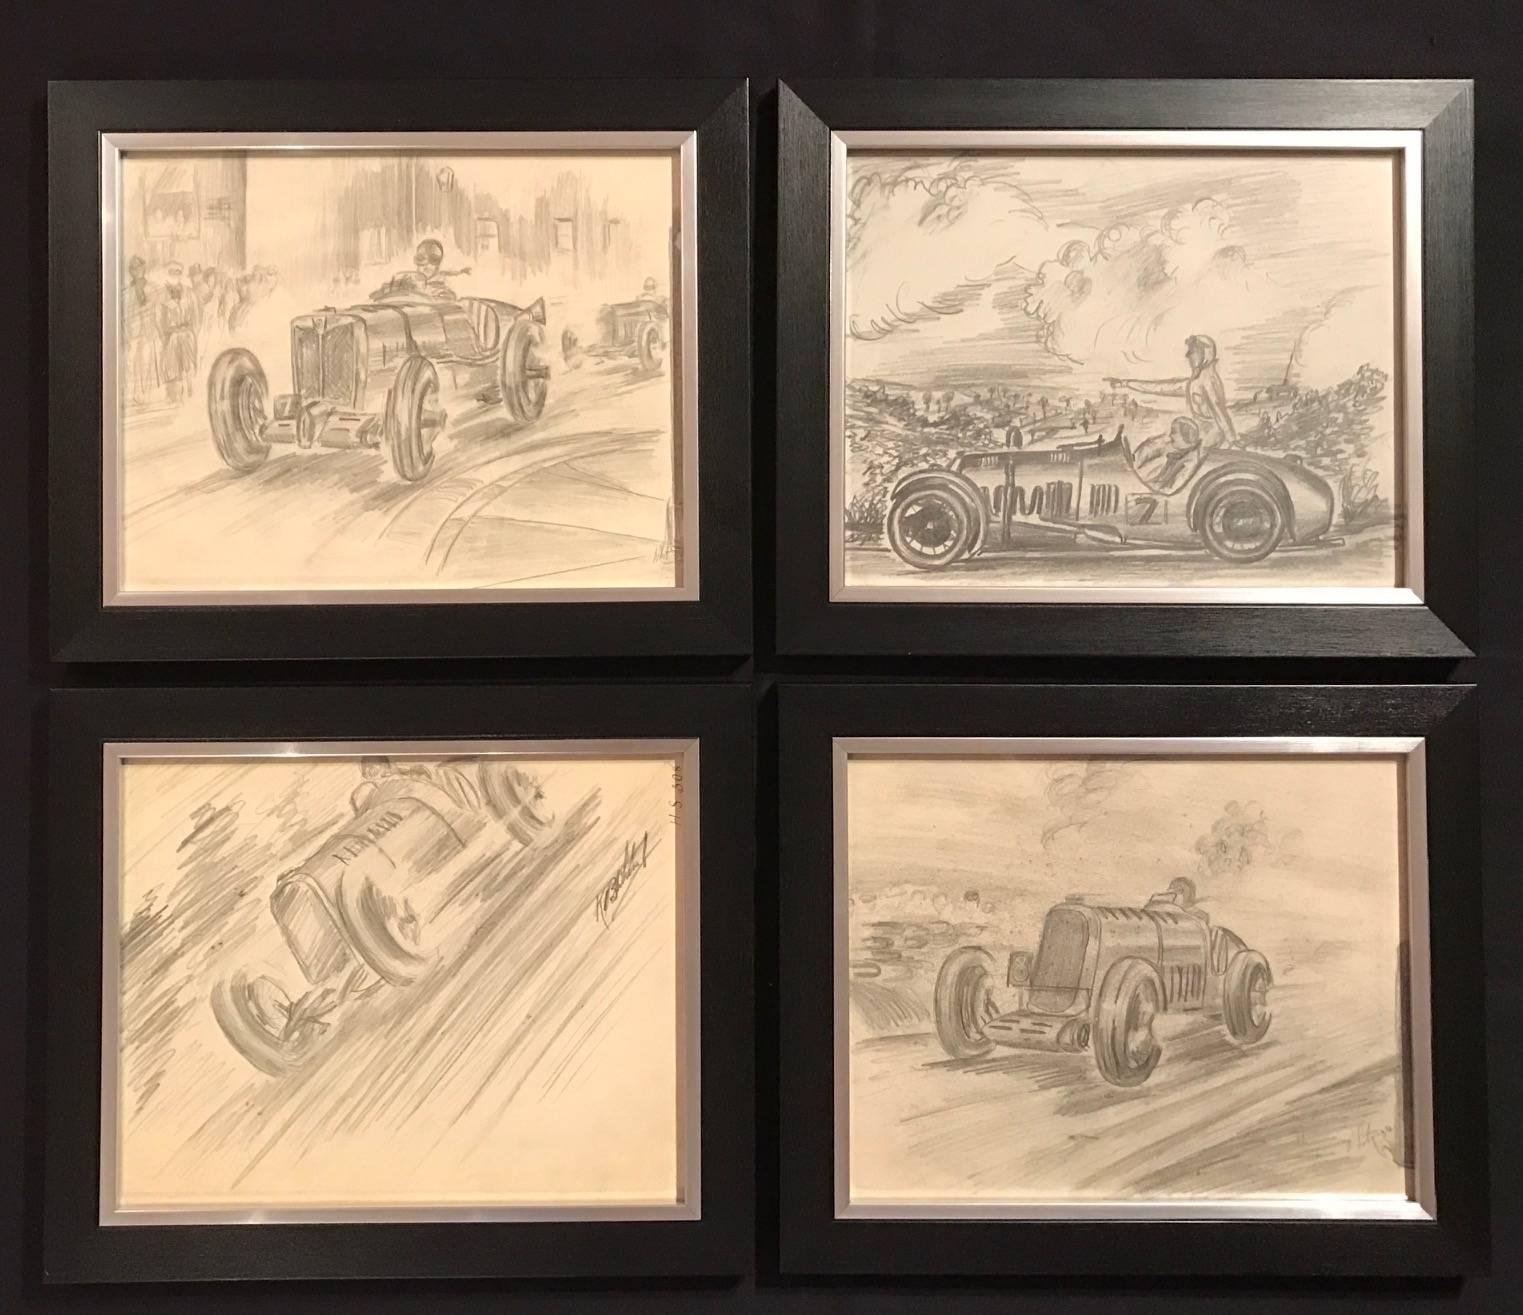 Wonderful set of four original pencil drawings depicting vintage motor car racing scenes - such fun!

Beautifully presented in matching set of four black wood frames with chrome inset slips and behind glass. 

The drawings are all by the same artist